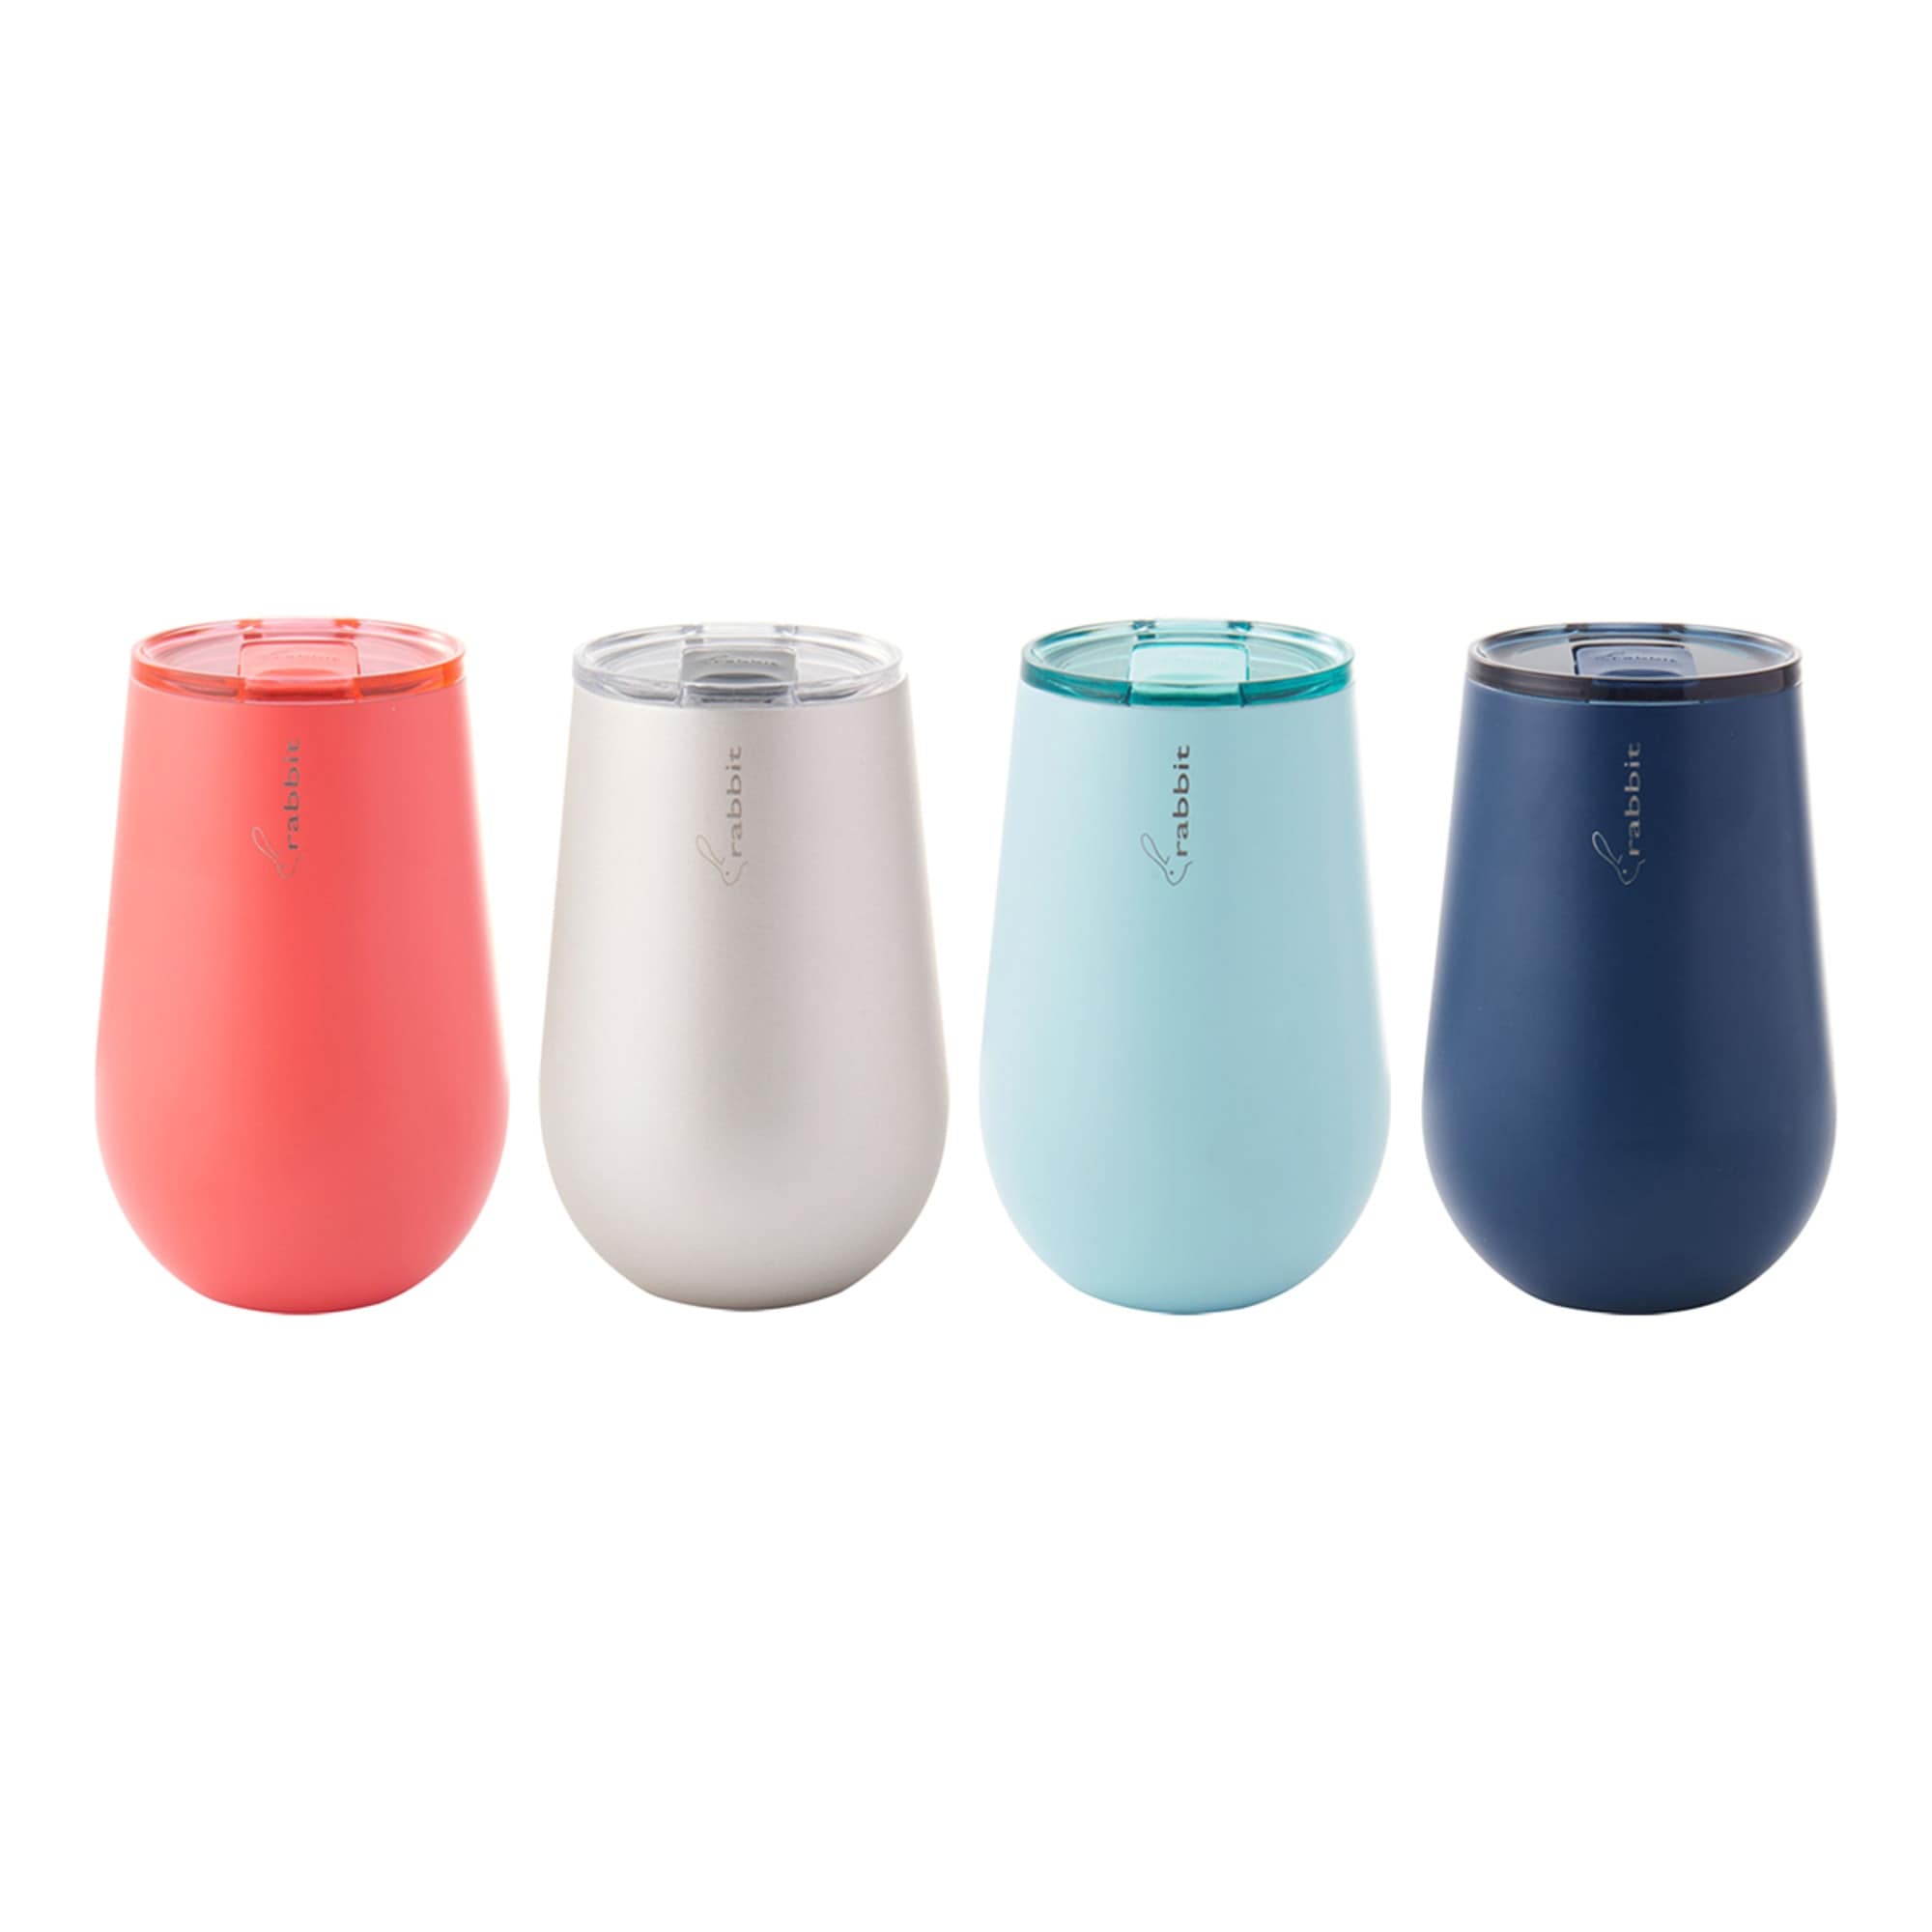 Rabbit Set of 4 Stainless Steel Tumblers